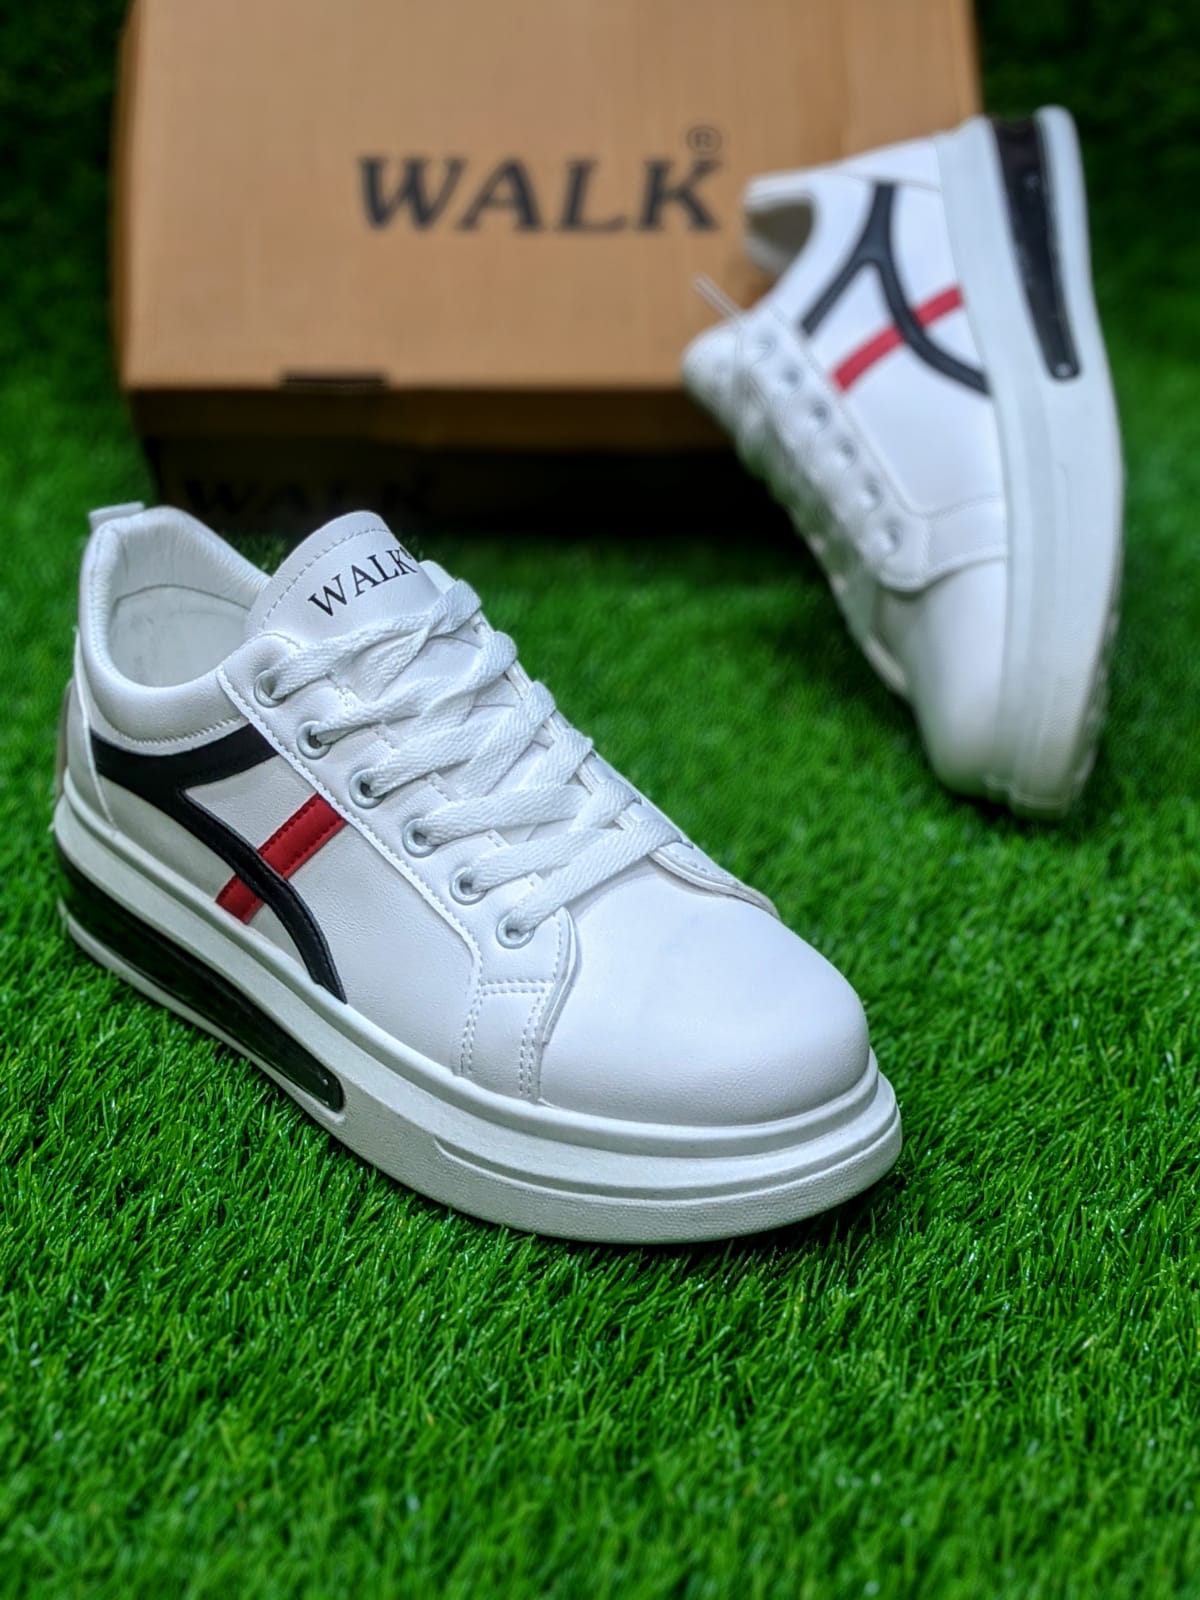 Walk - Supercup Leather  Shoes - White Black